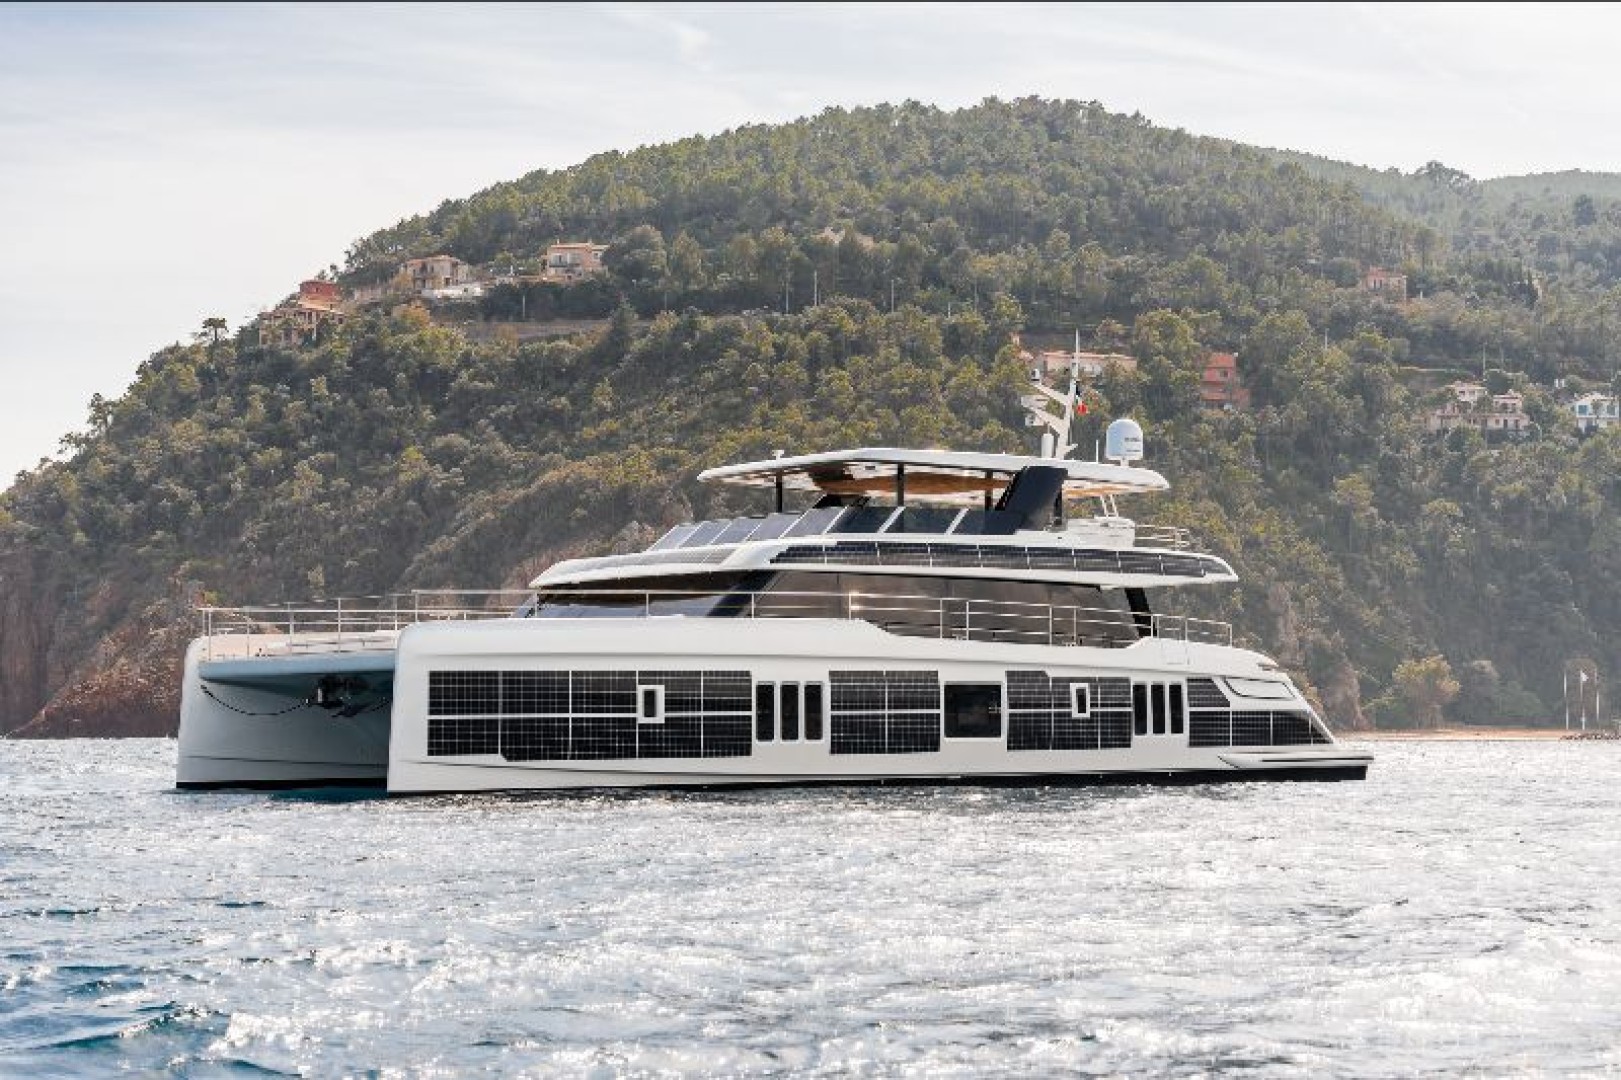 2023, a successful year for Sunreef Yachts